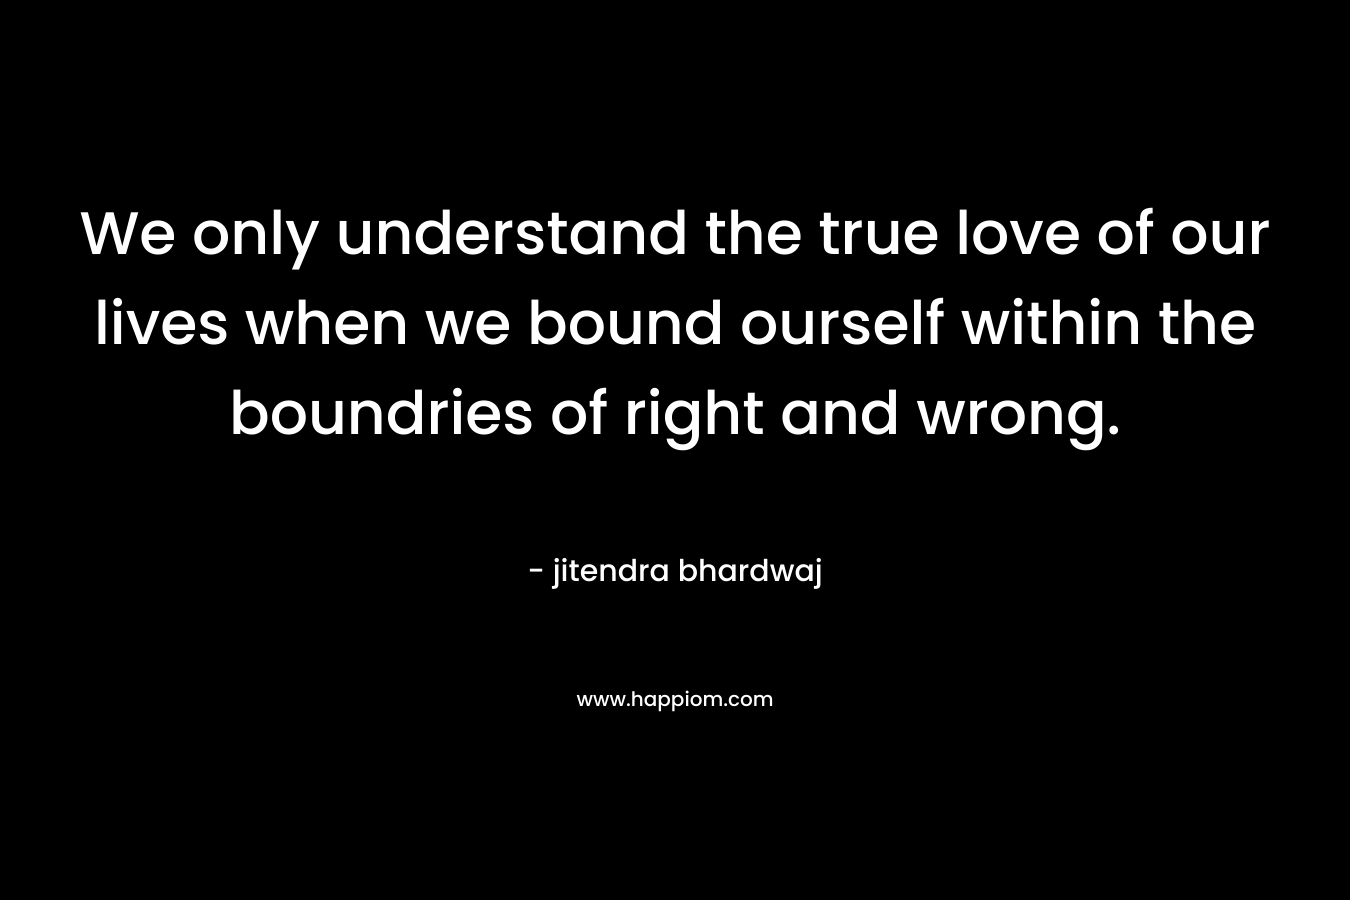 We only understand the true love of our lives when we bound ourself within the boundries of right and wrong. – jitendra bhardwaj